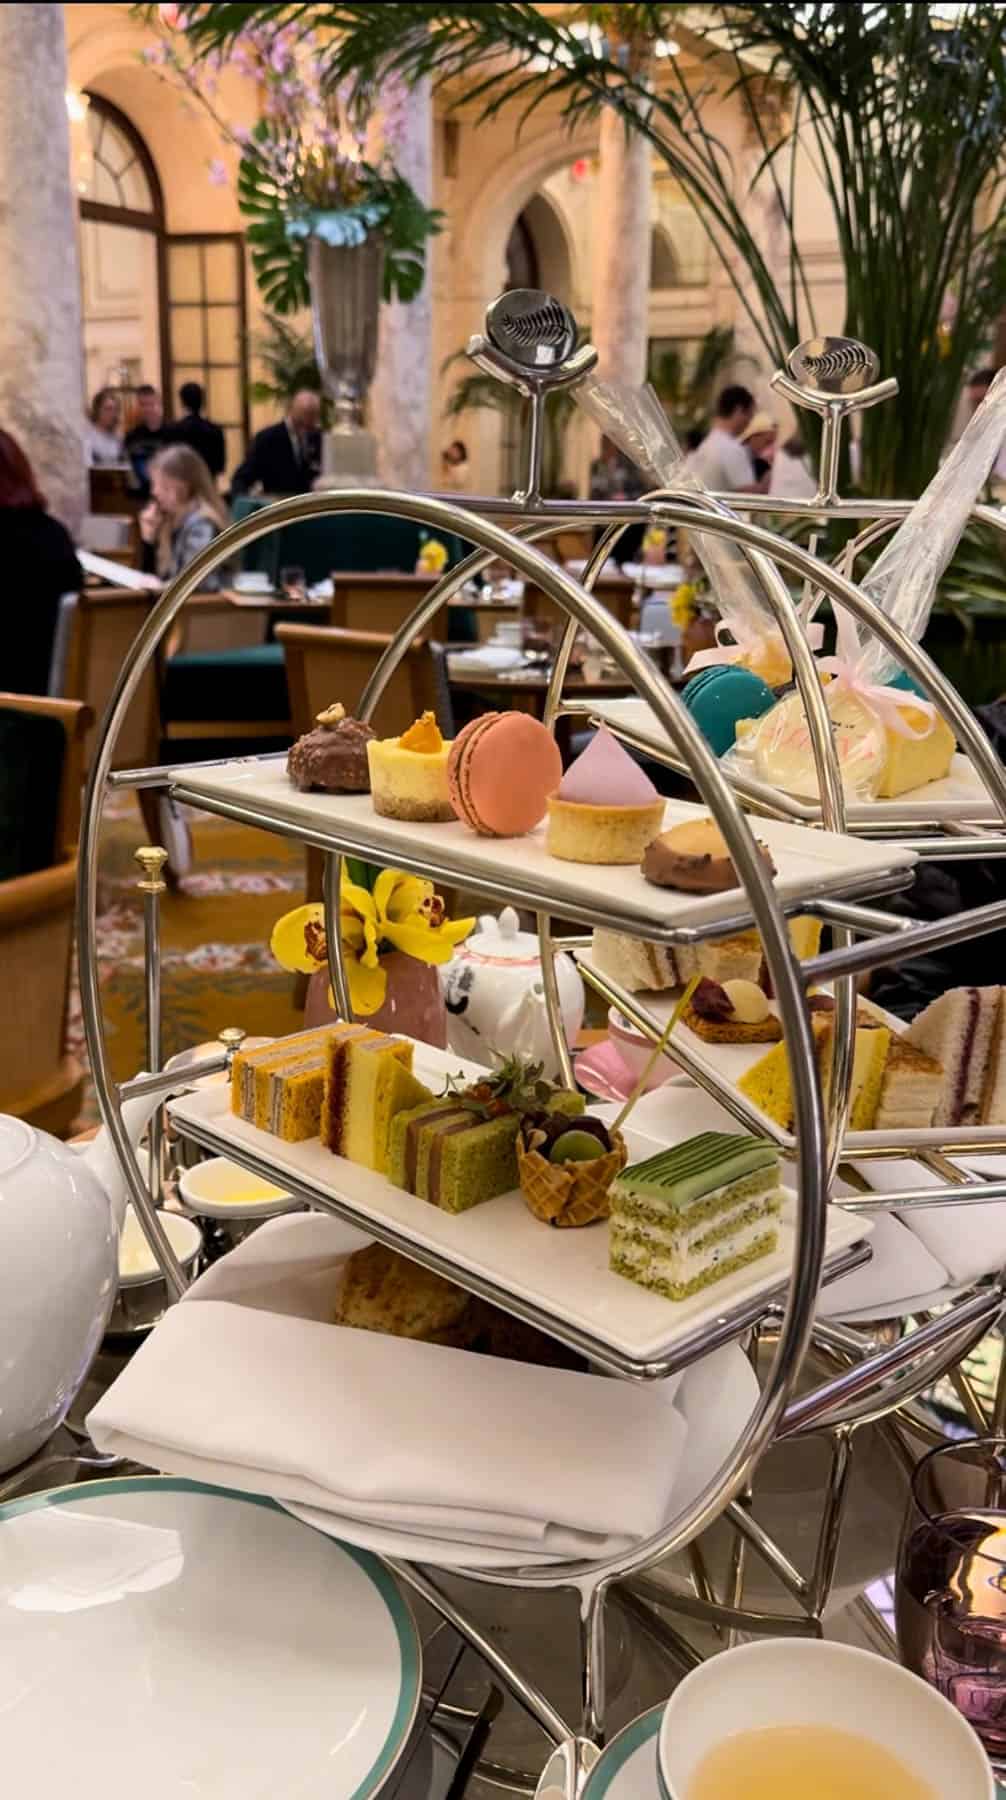 Tea sandwiches and pastries at the Palm Court in the Plaza Hotel.